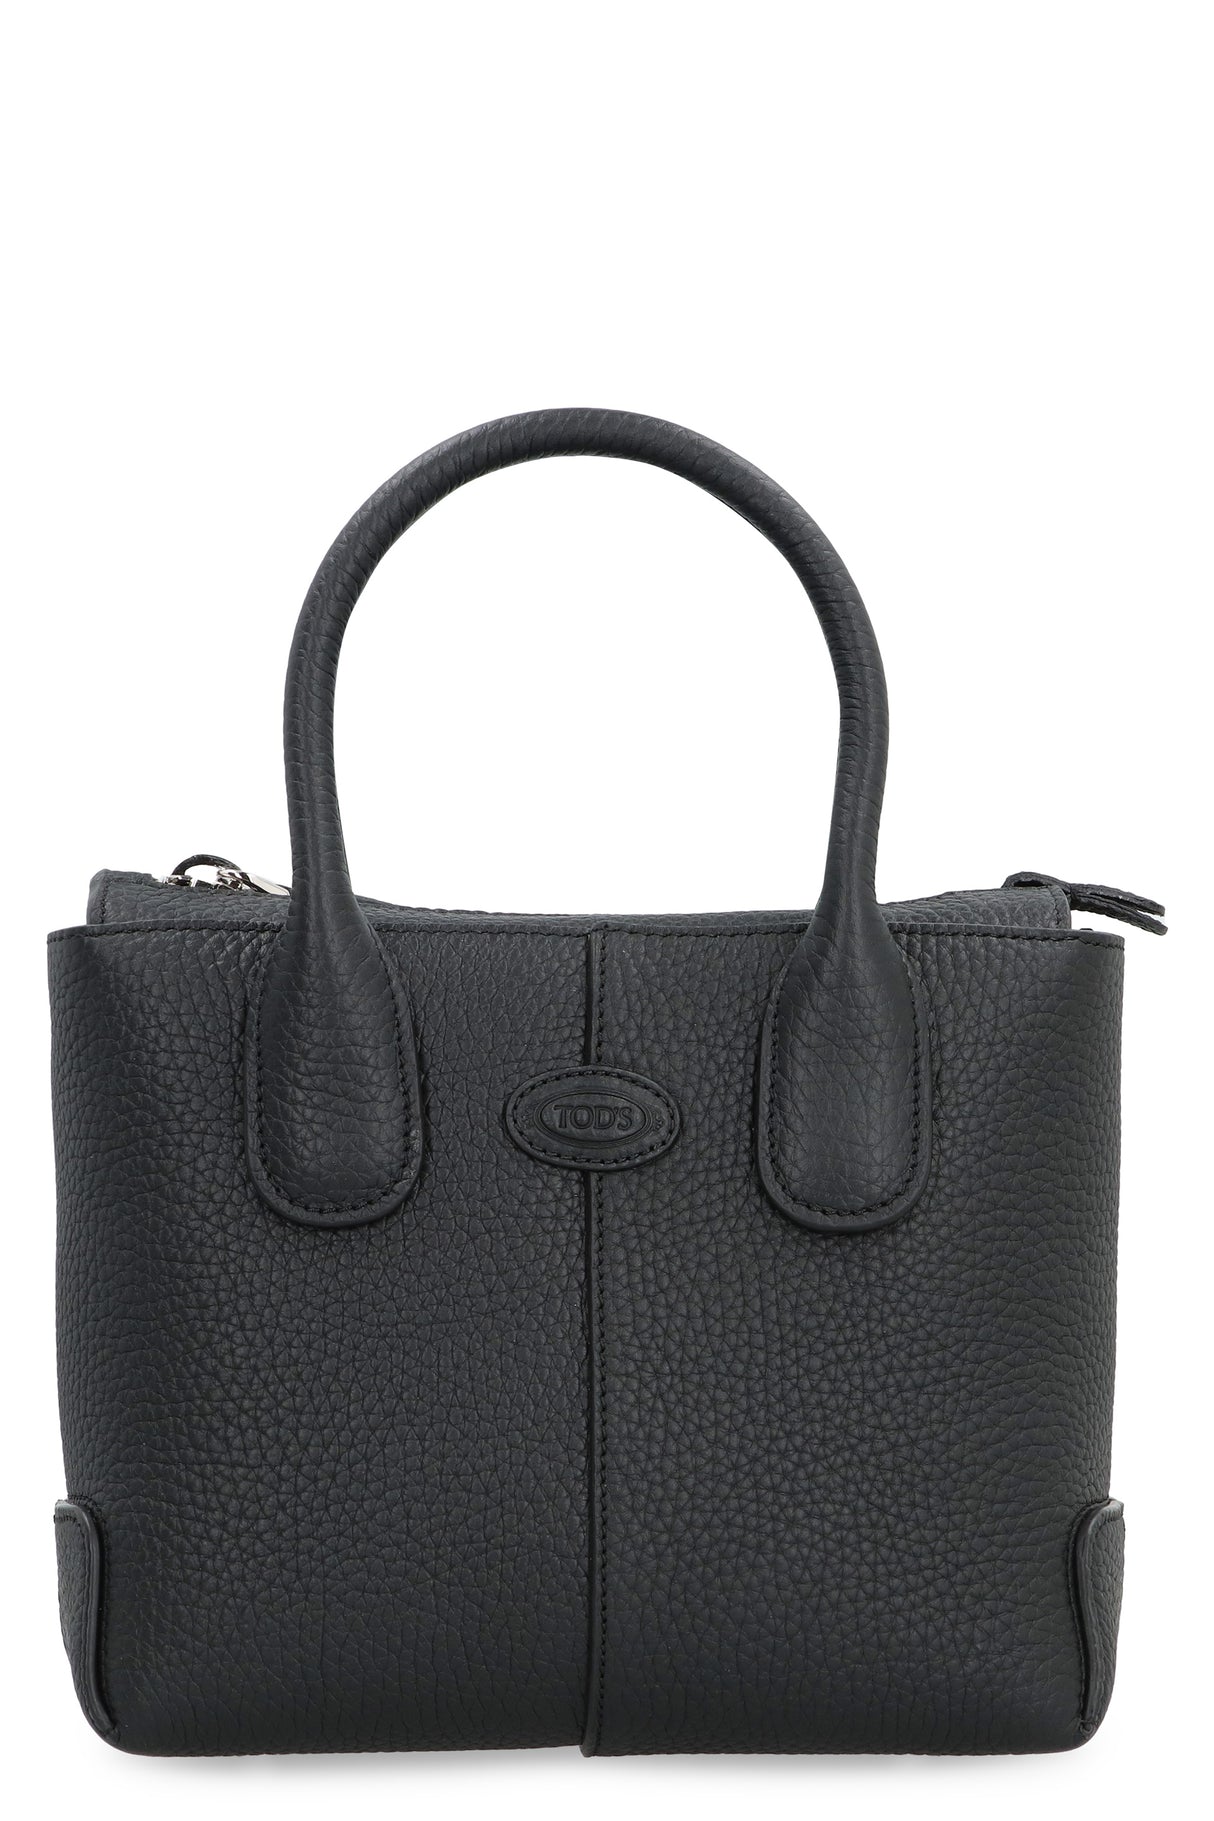 Black Pebbled Leather Tote with Silver-Tone Hardware